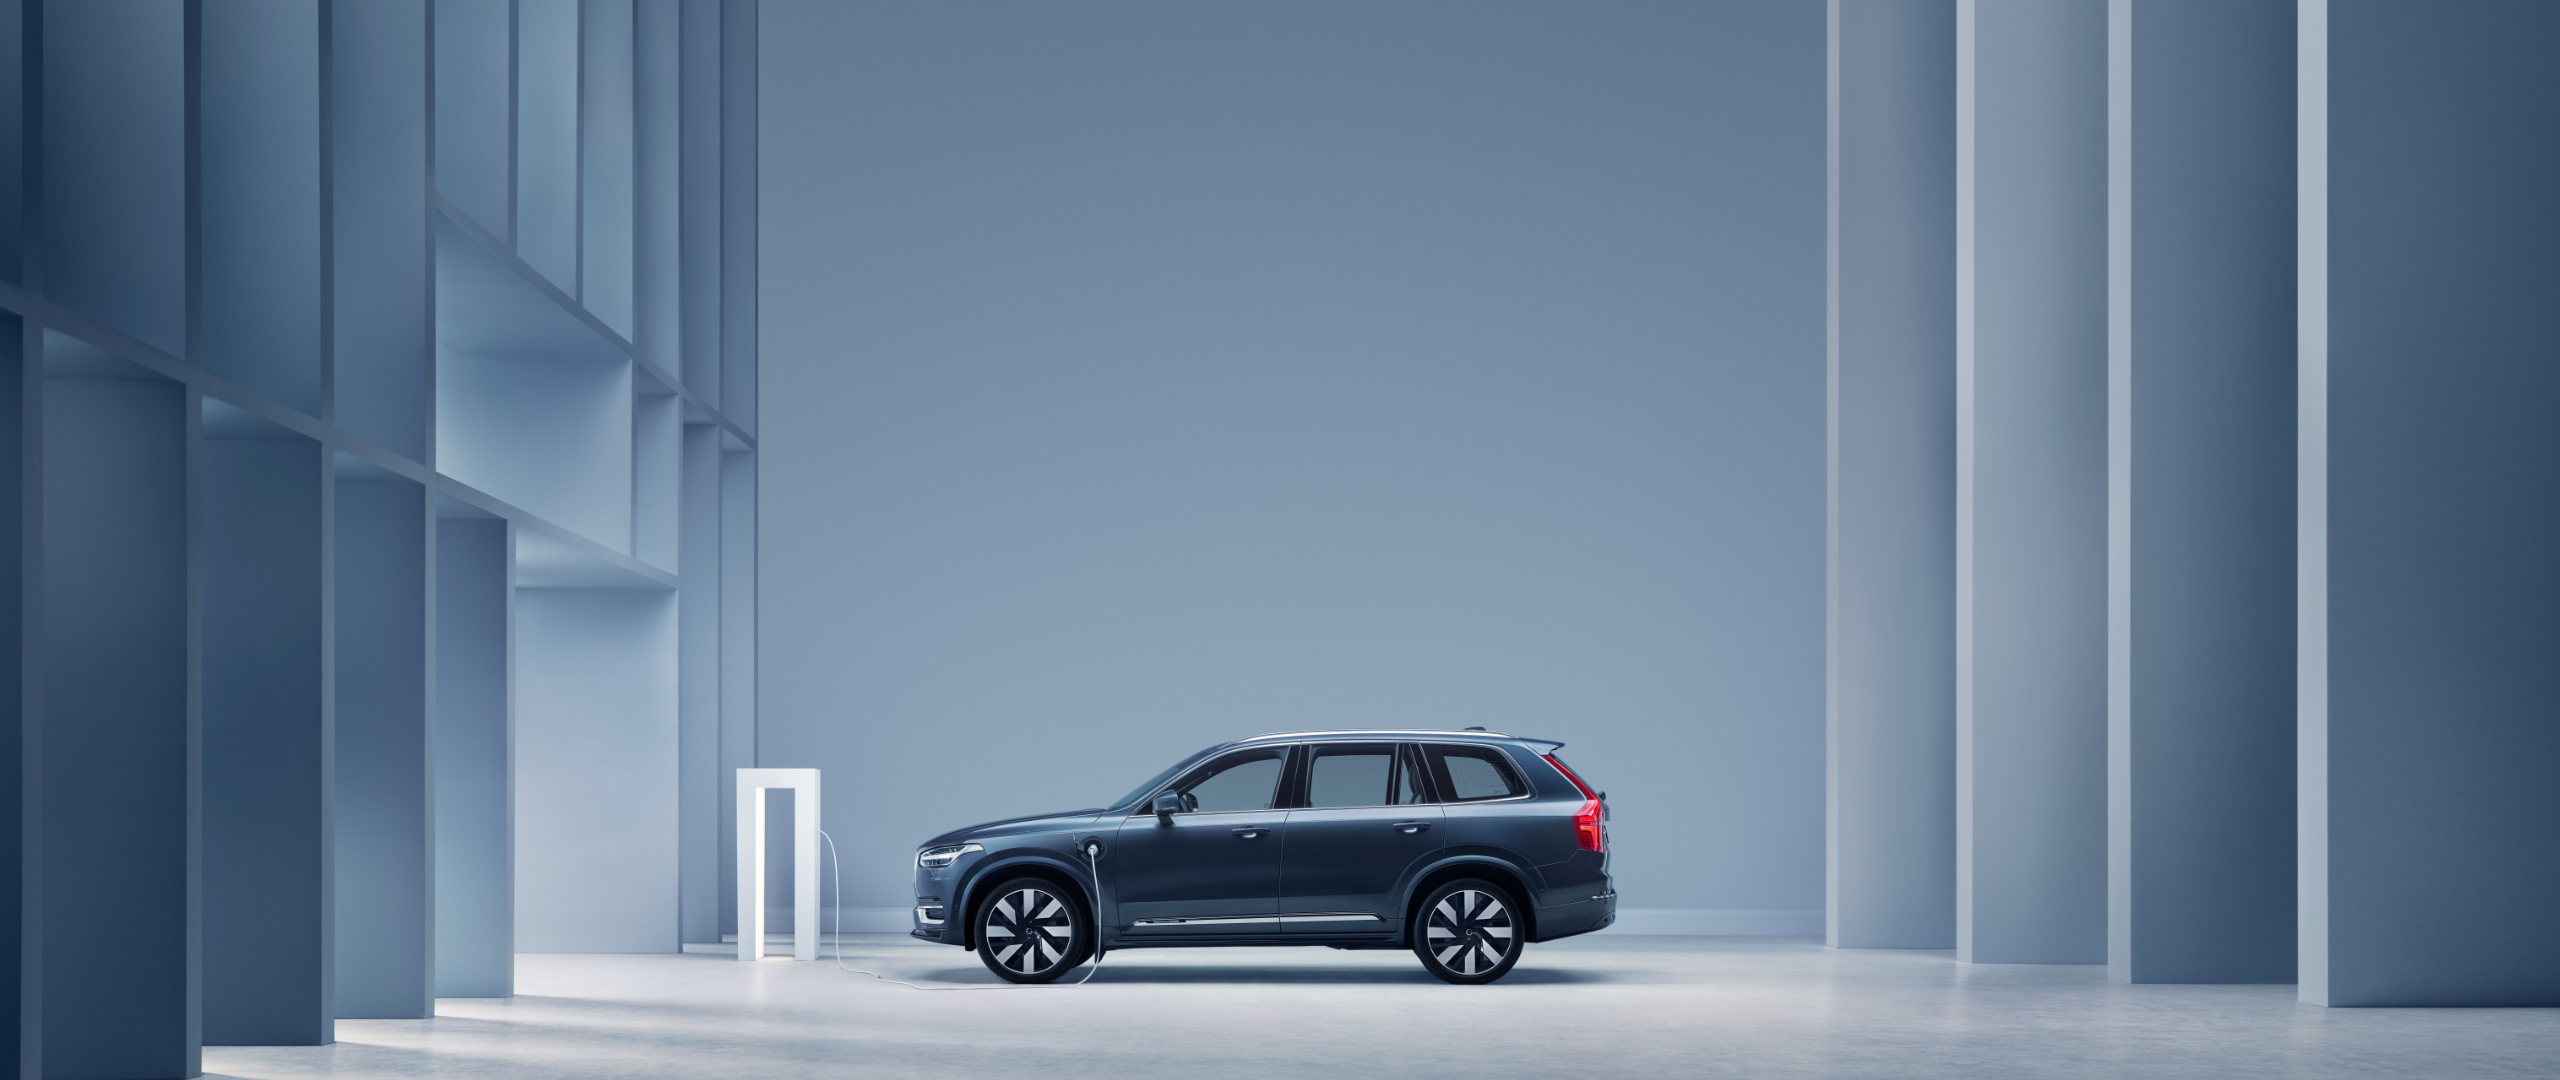 The side profile of a Volvo XC60 PHEV